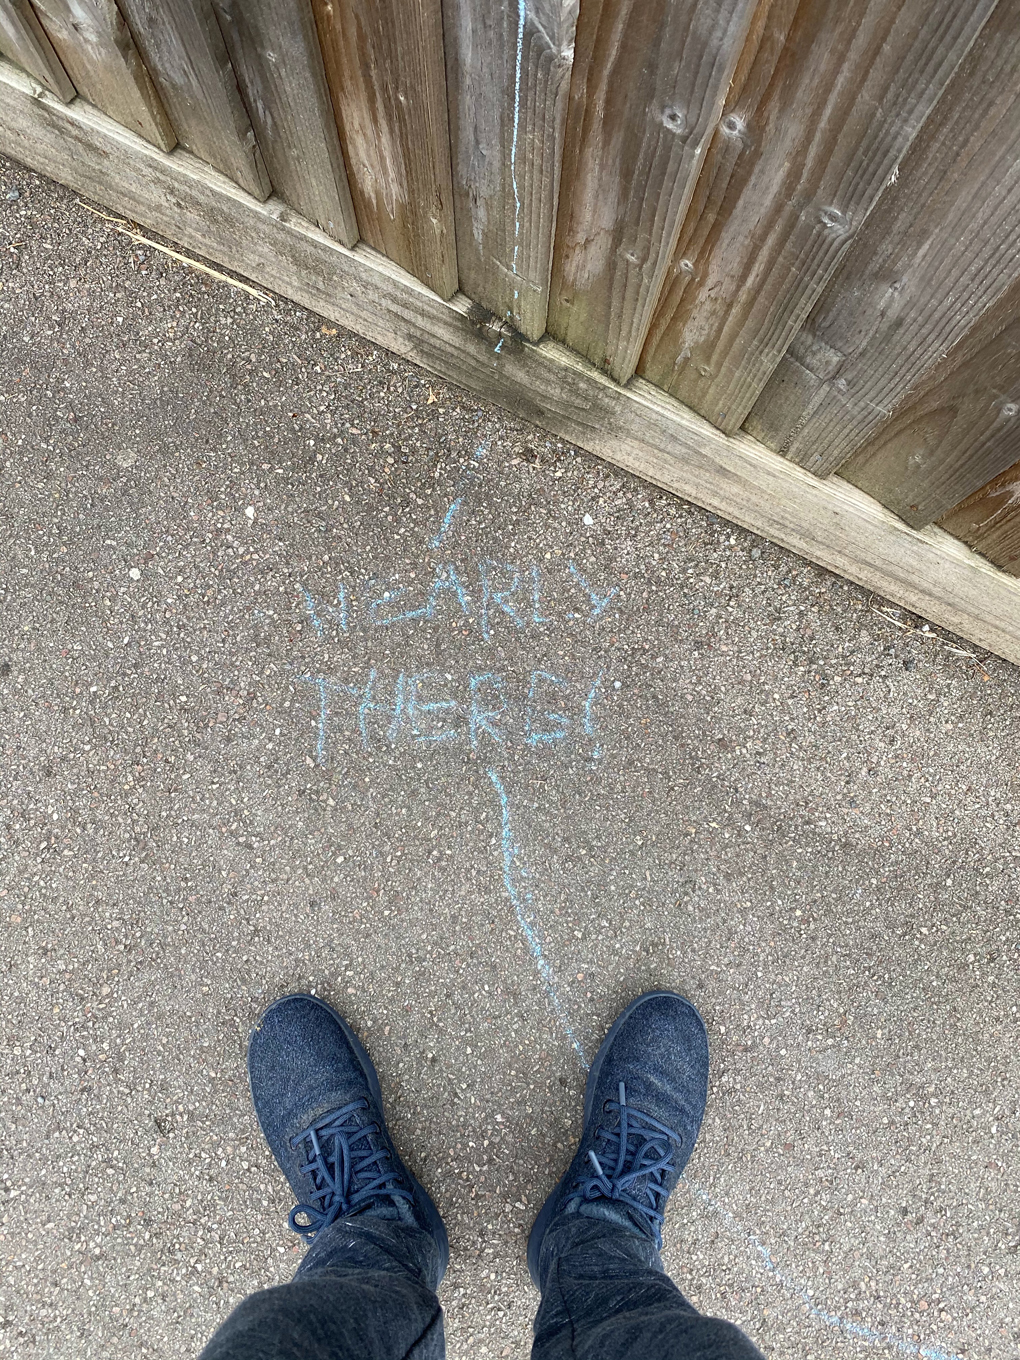 Looking down at a rough concrete pavement where someone has written ‘Nearly there’ in blue chalk. A line, also in chalk, leads away from the message to an unknown destination.